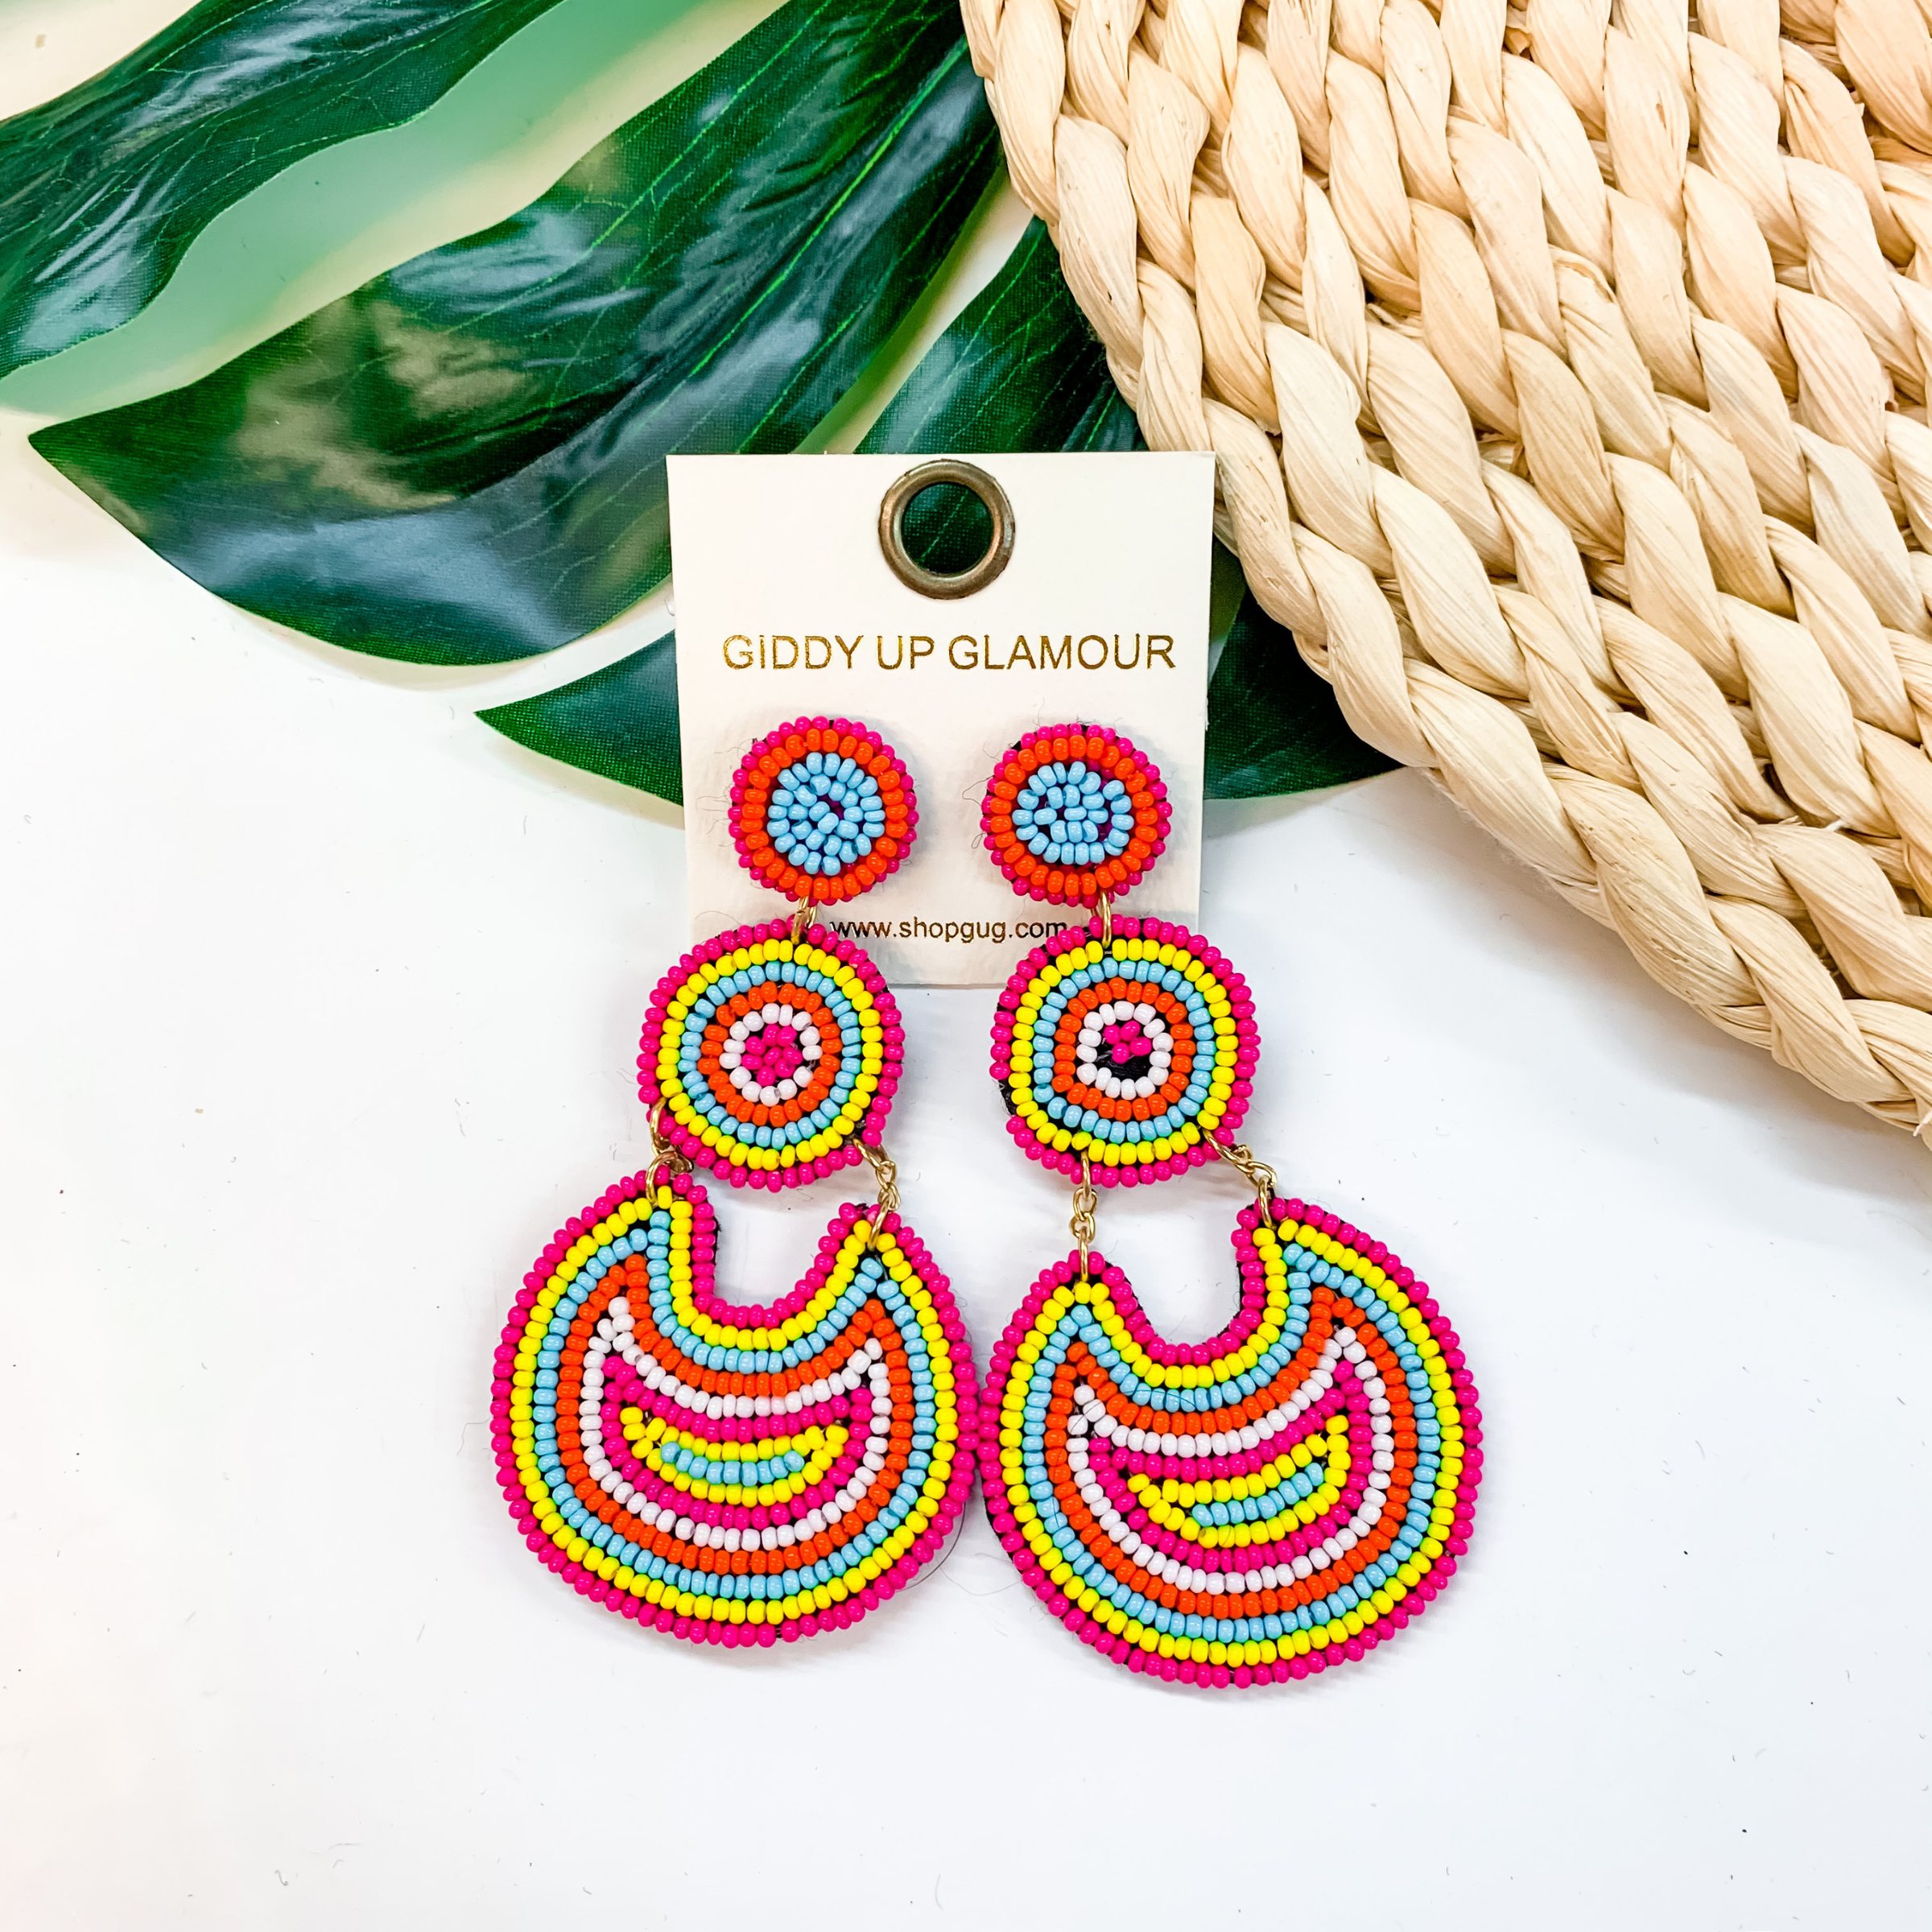 Pure Perfection Seed Bead 3 Tiered Drop Earrings in Multicolored - Giddy Up Glamour Boutique